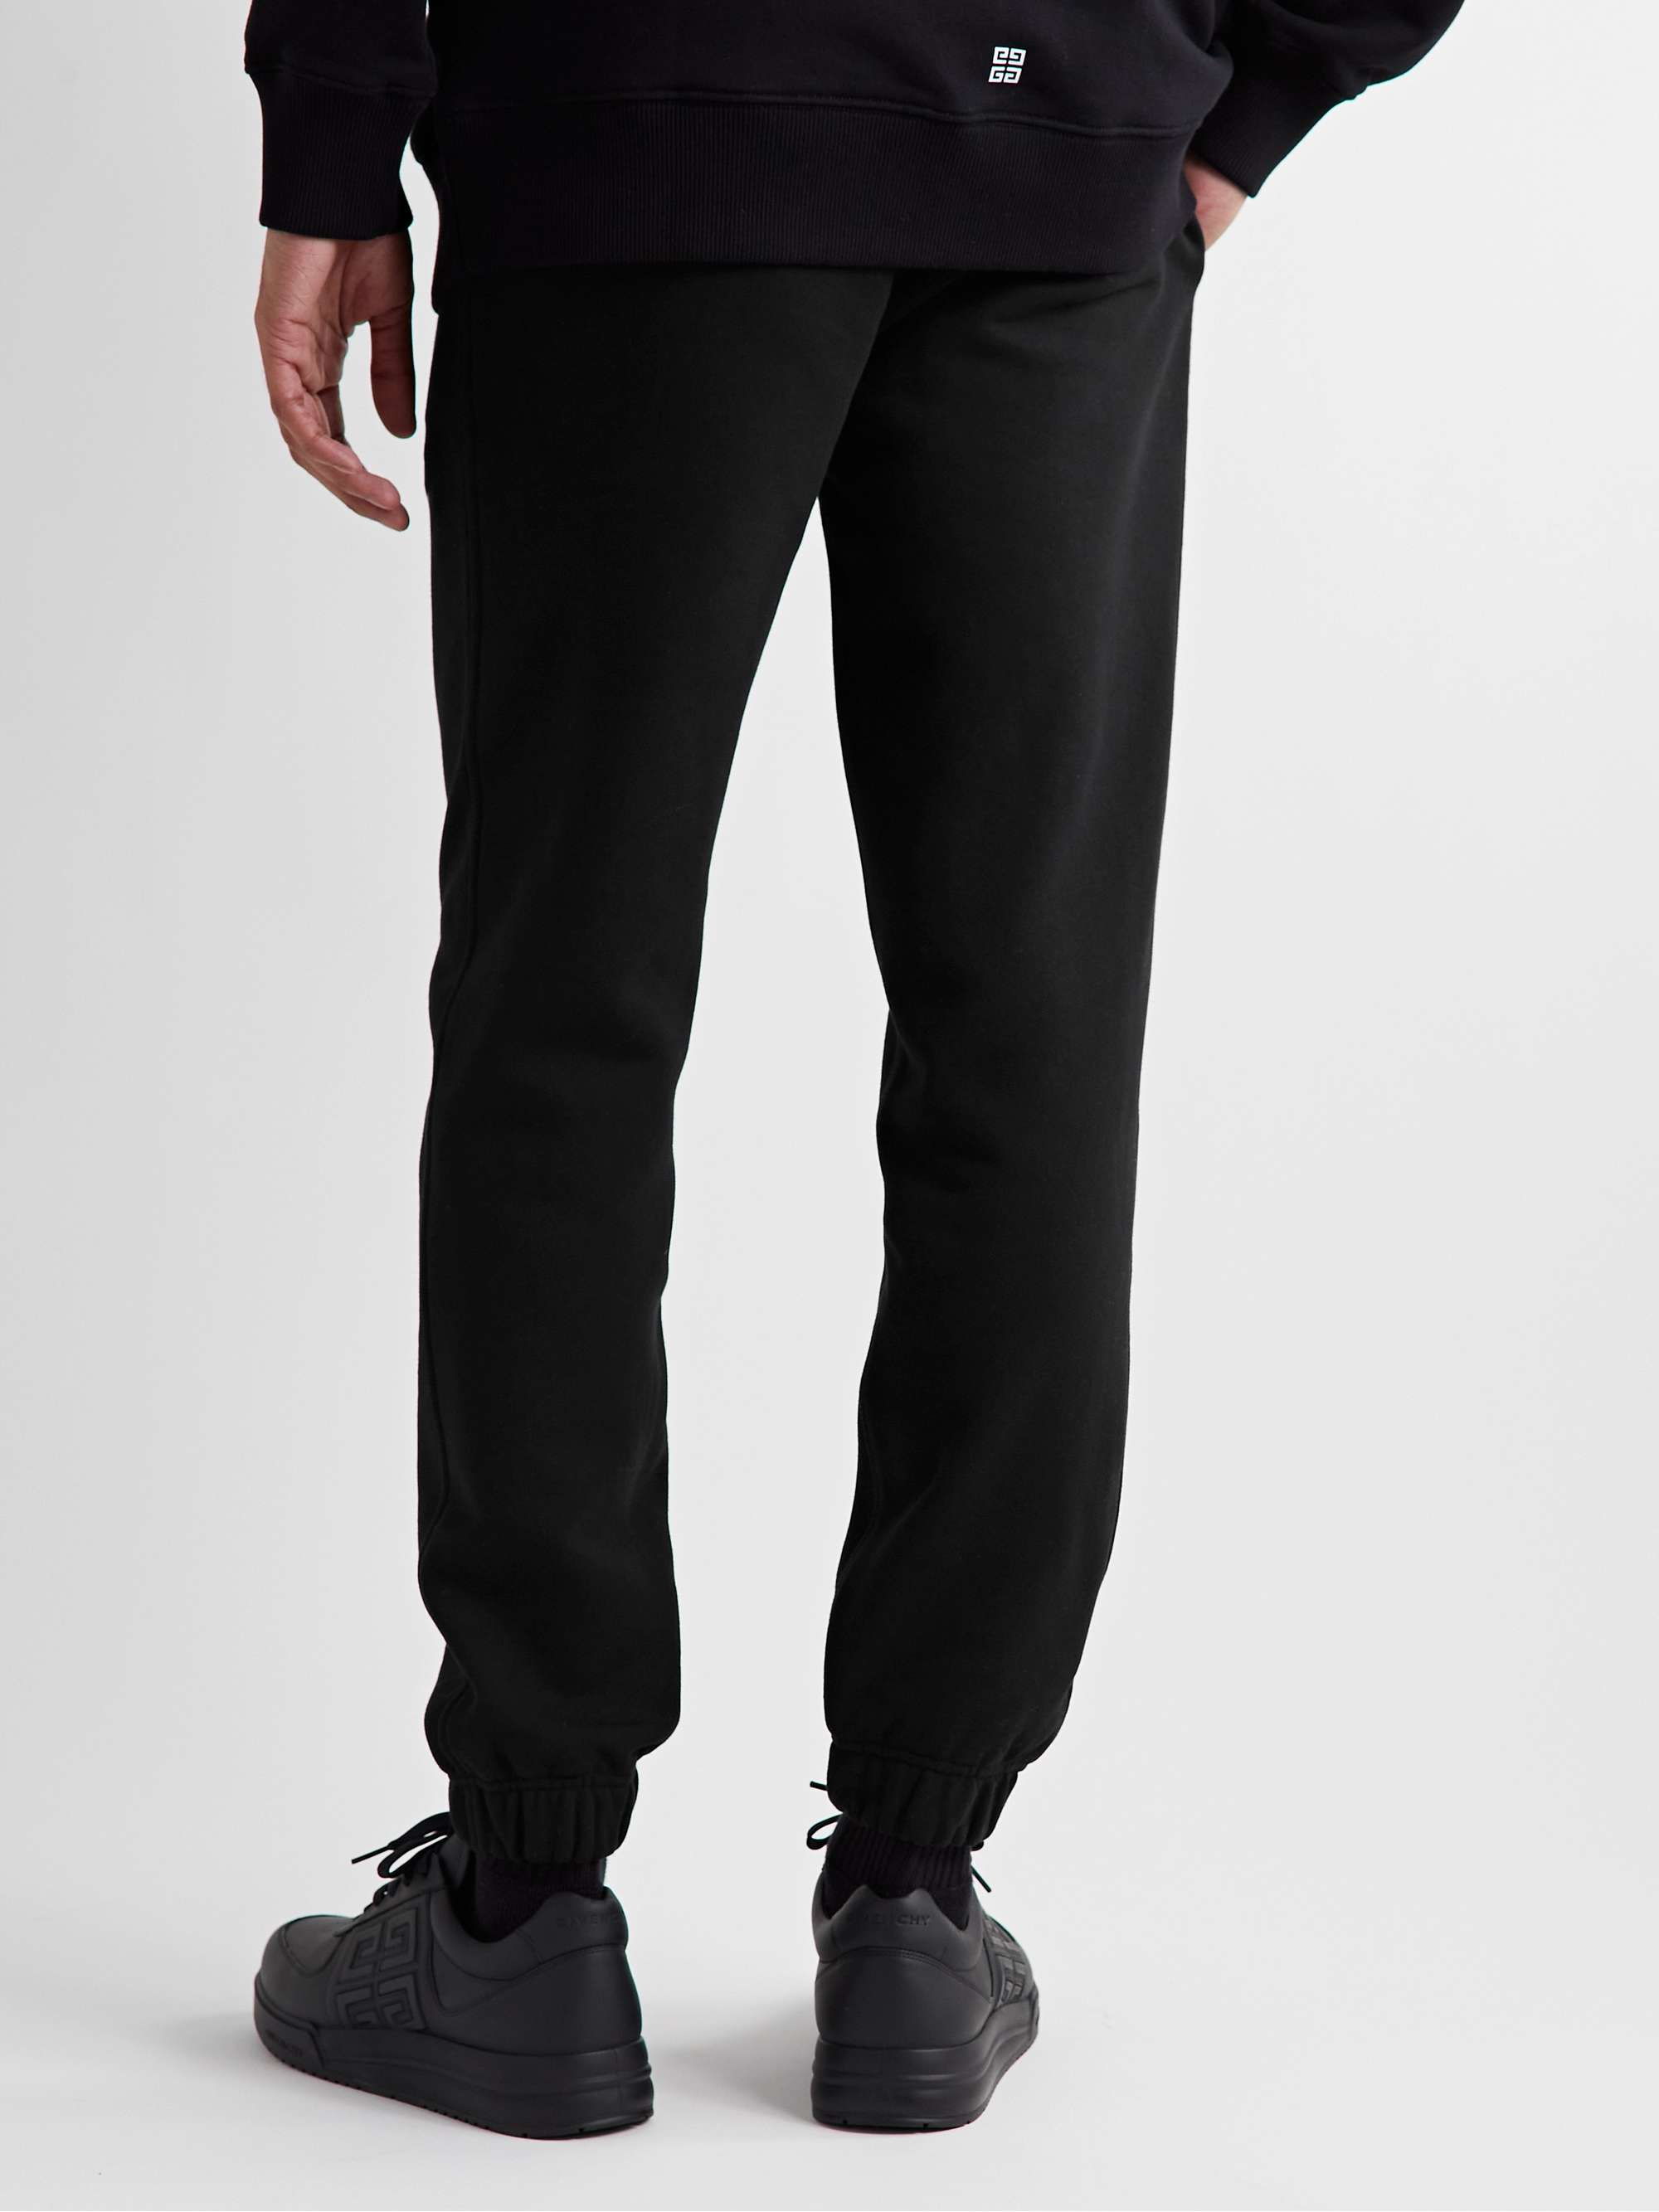 GIVENCHY + Disney Oswald Tapered Embroidered Cotton-Jersey Sweatpants